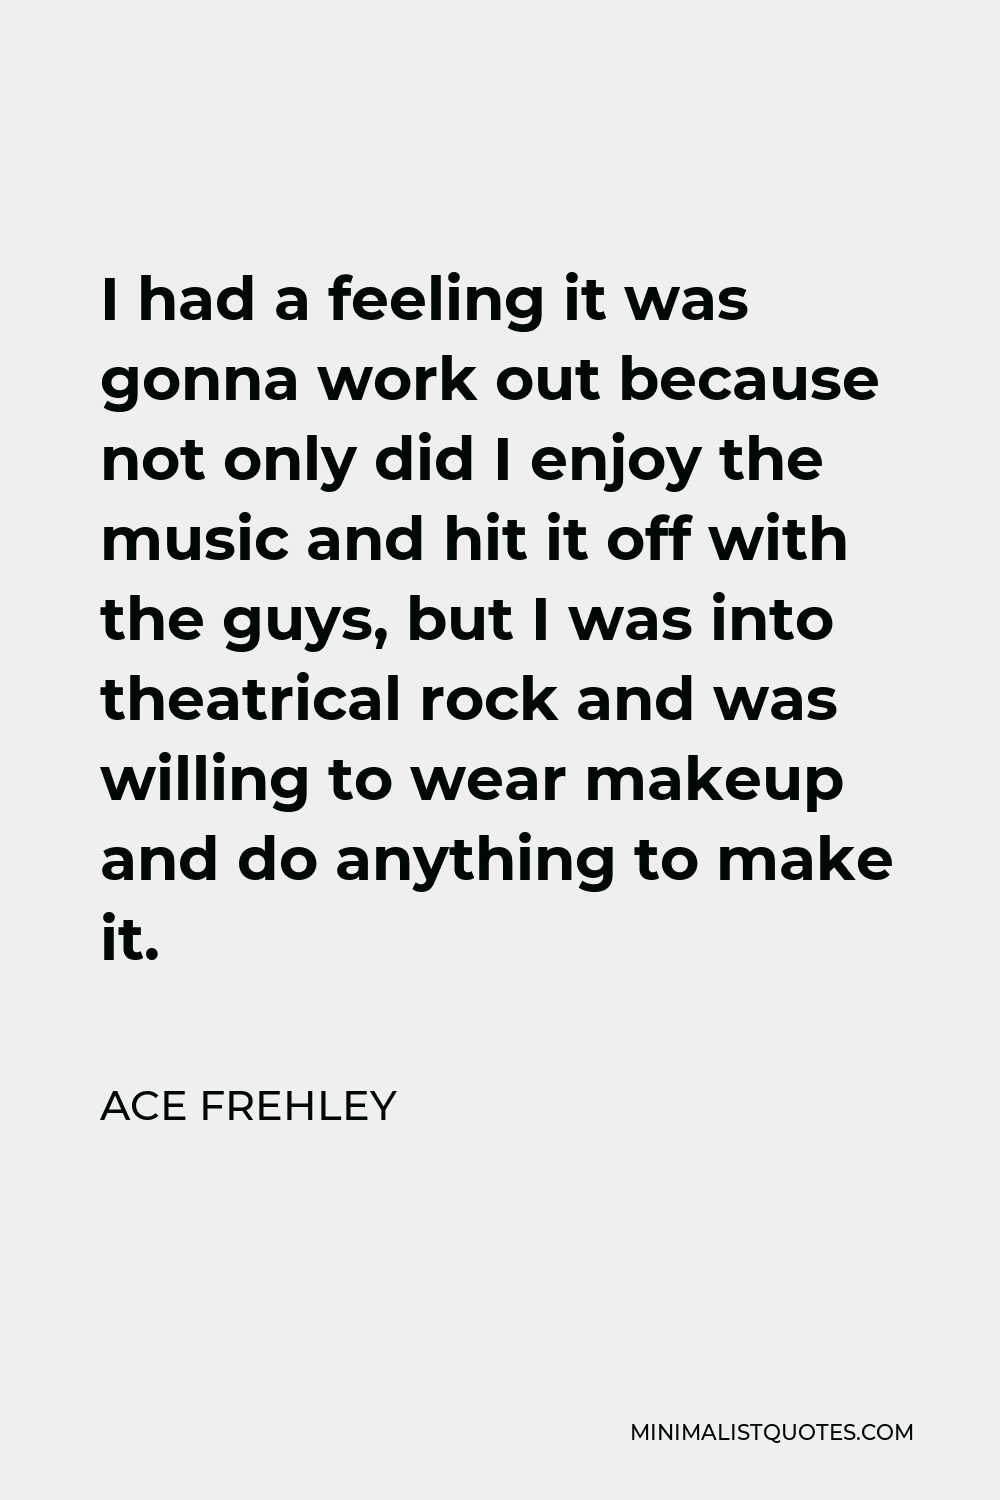 Ace Frehley Quote - I had a feeling it was gonna work out because not only did I enjoy the music and hit it off with the guys, but I was into theatrical rock and was willing to wear makeup and do anything to make it.